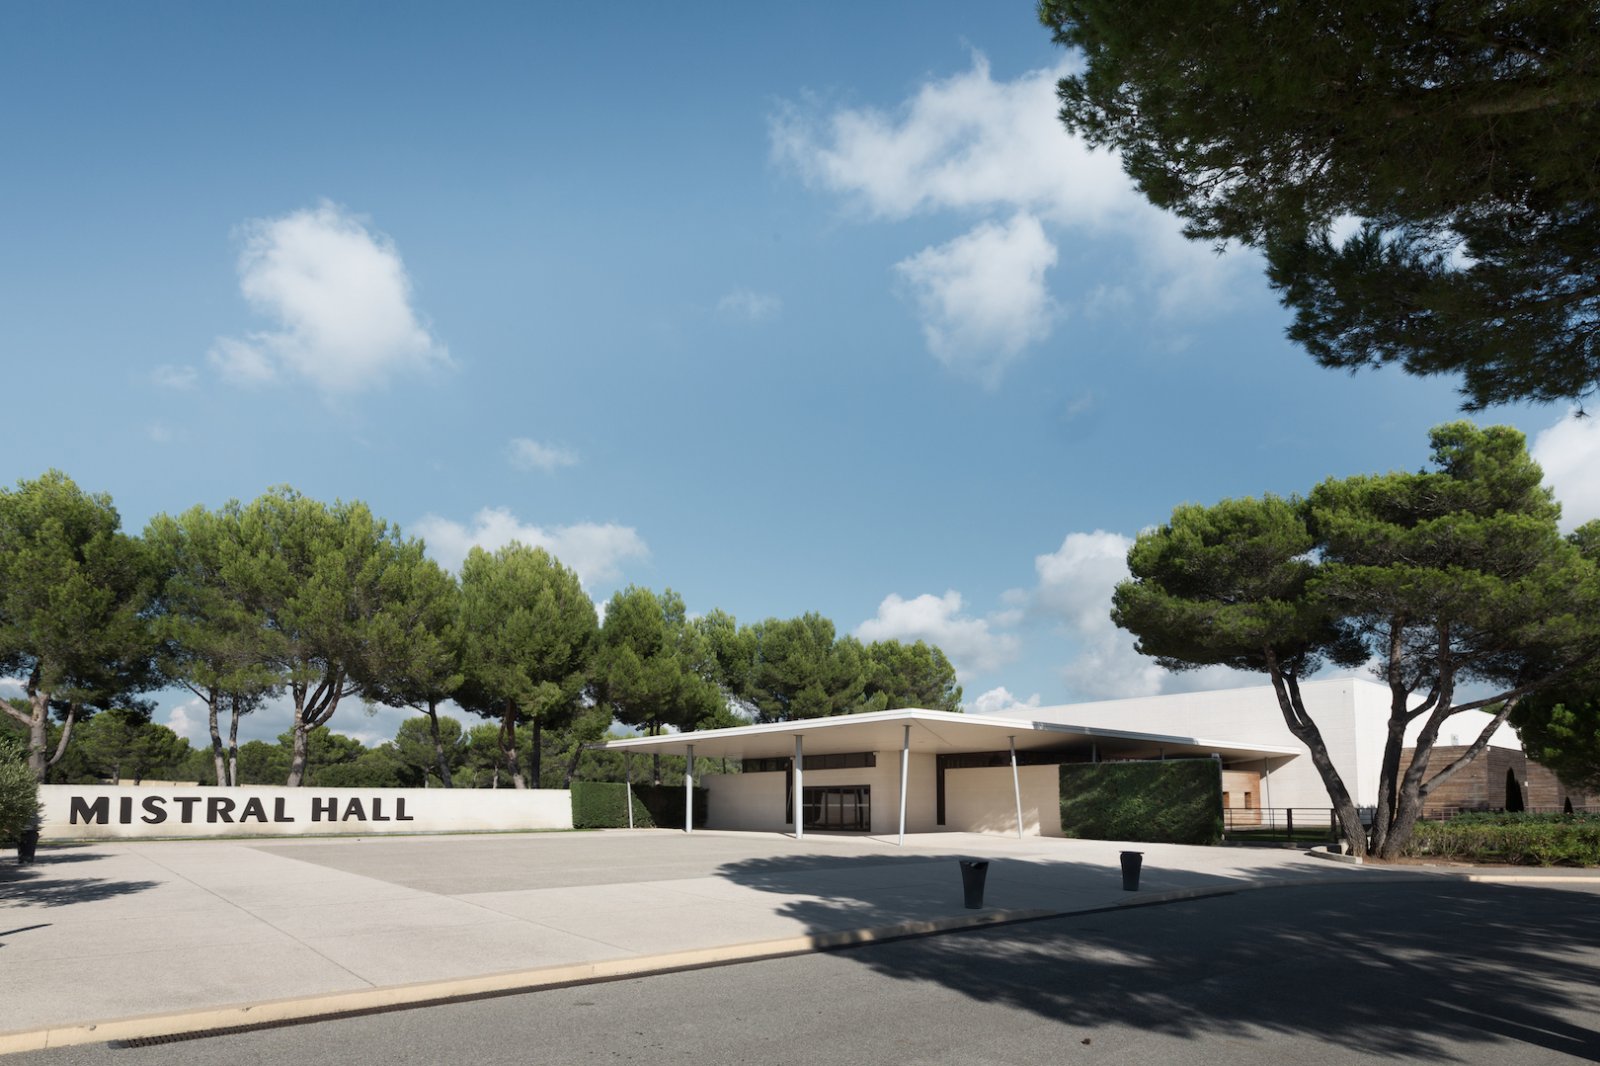 "SRO Race Centre by MMC" unveiled at Circuit Paul Ricard